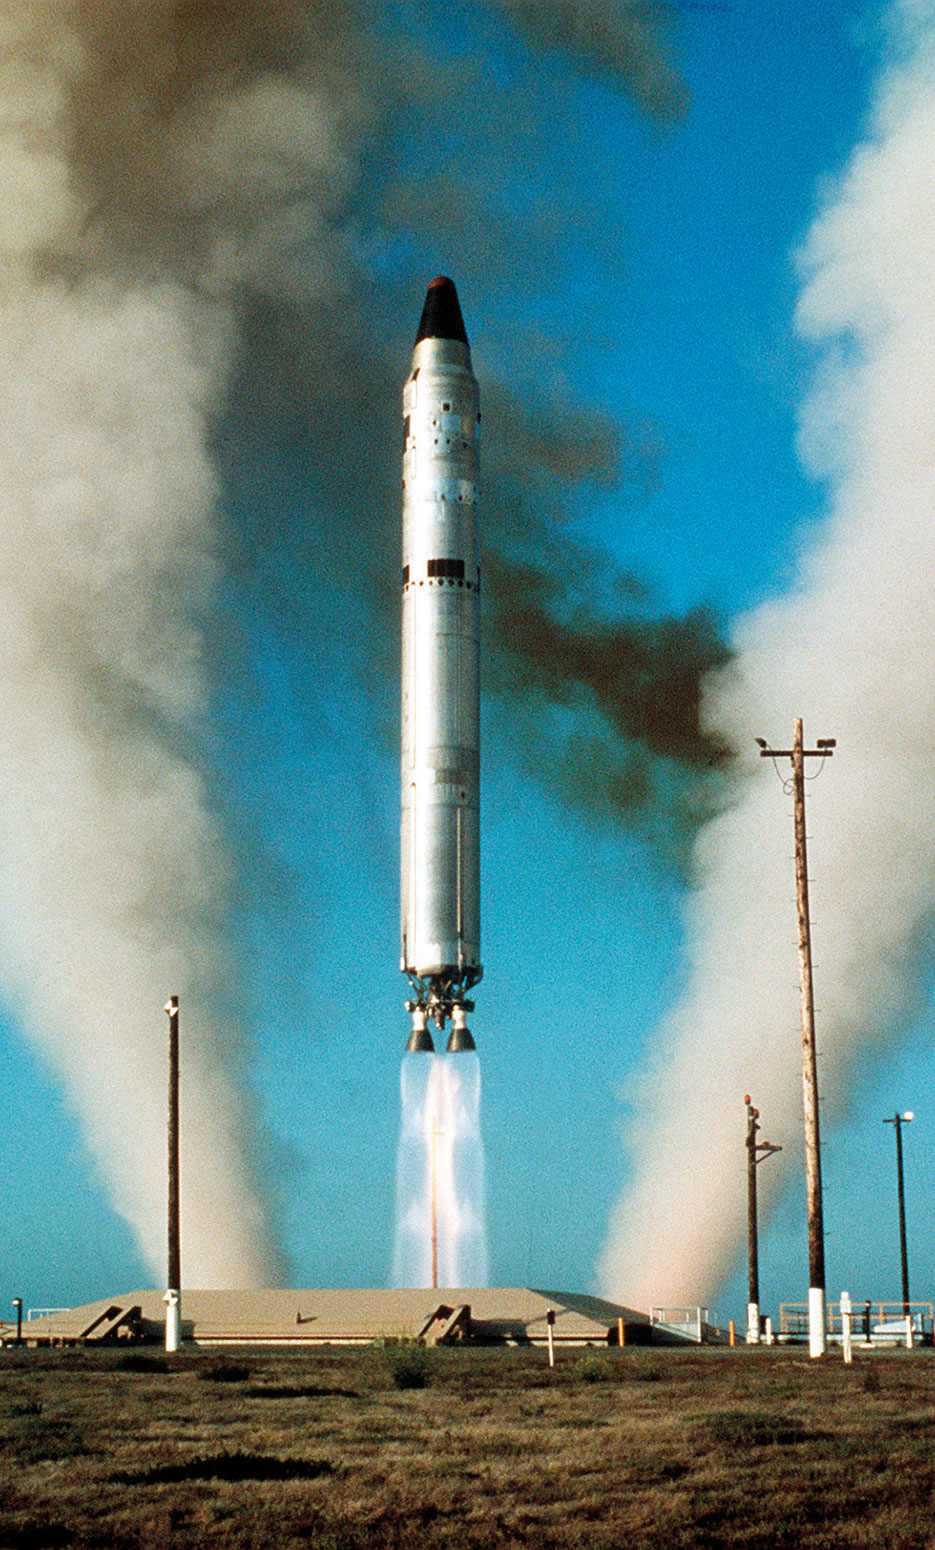 Test launch of LGM-25C Titan II ICBM from underground silo at Vandenberg Air Force Base during mid-1970s (U.S. Air Force)